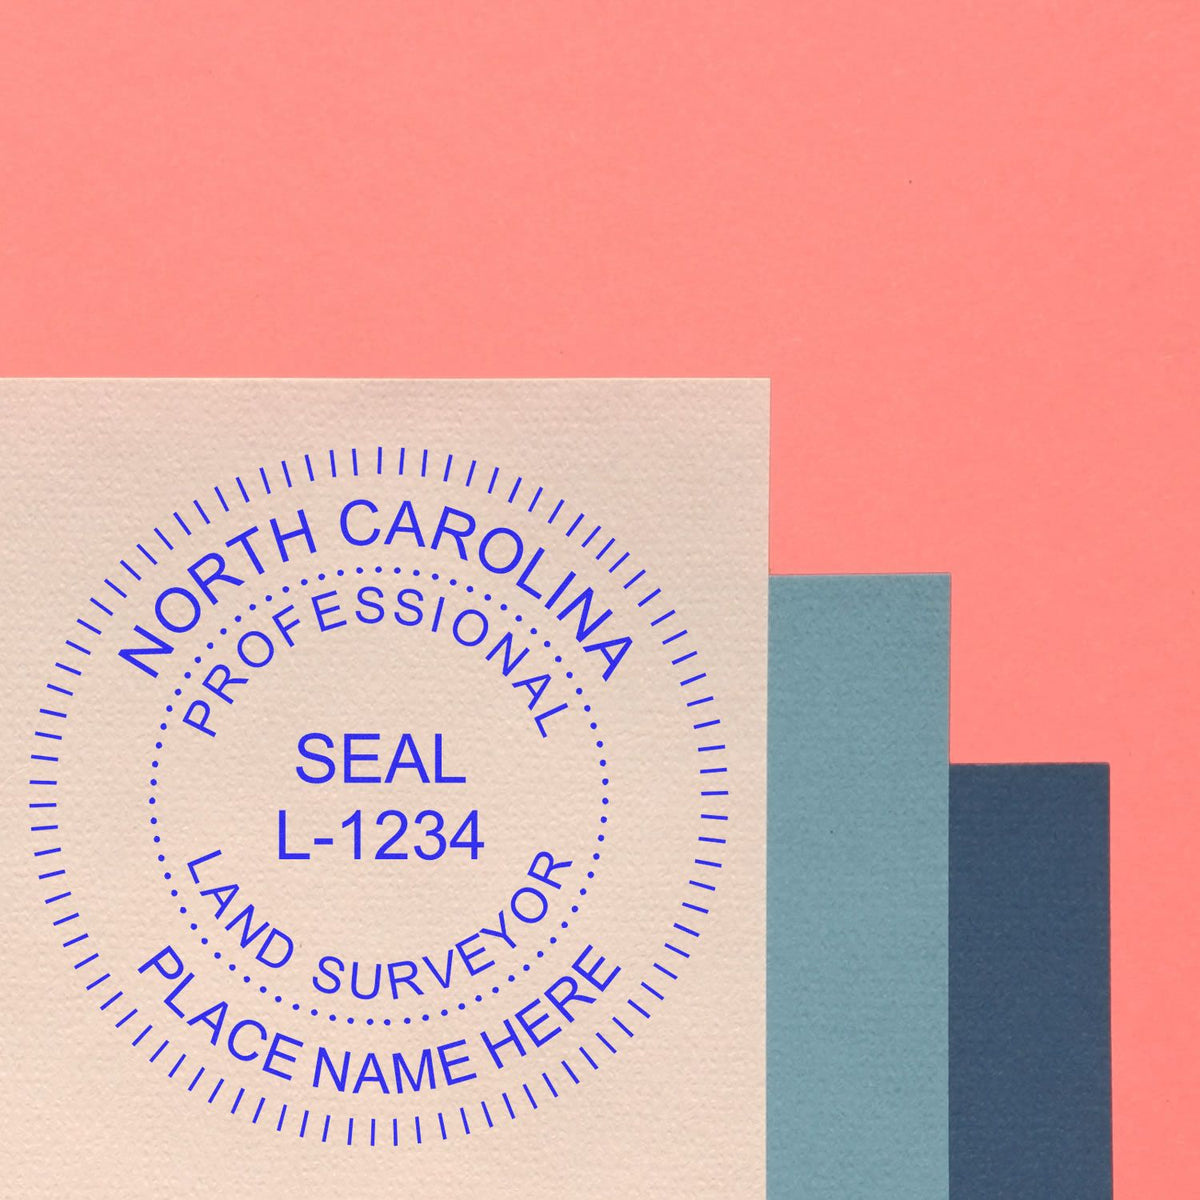 An alternative view of the Slim Pre-Inked North Carolina Land Surveyor Seal Stamp stamped on a sheet of paper showing the image in use